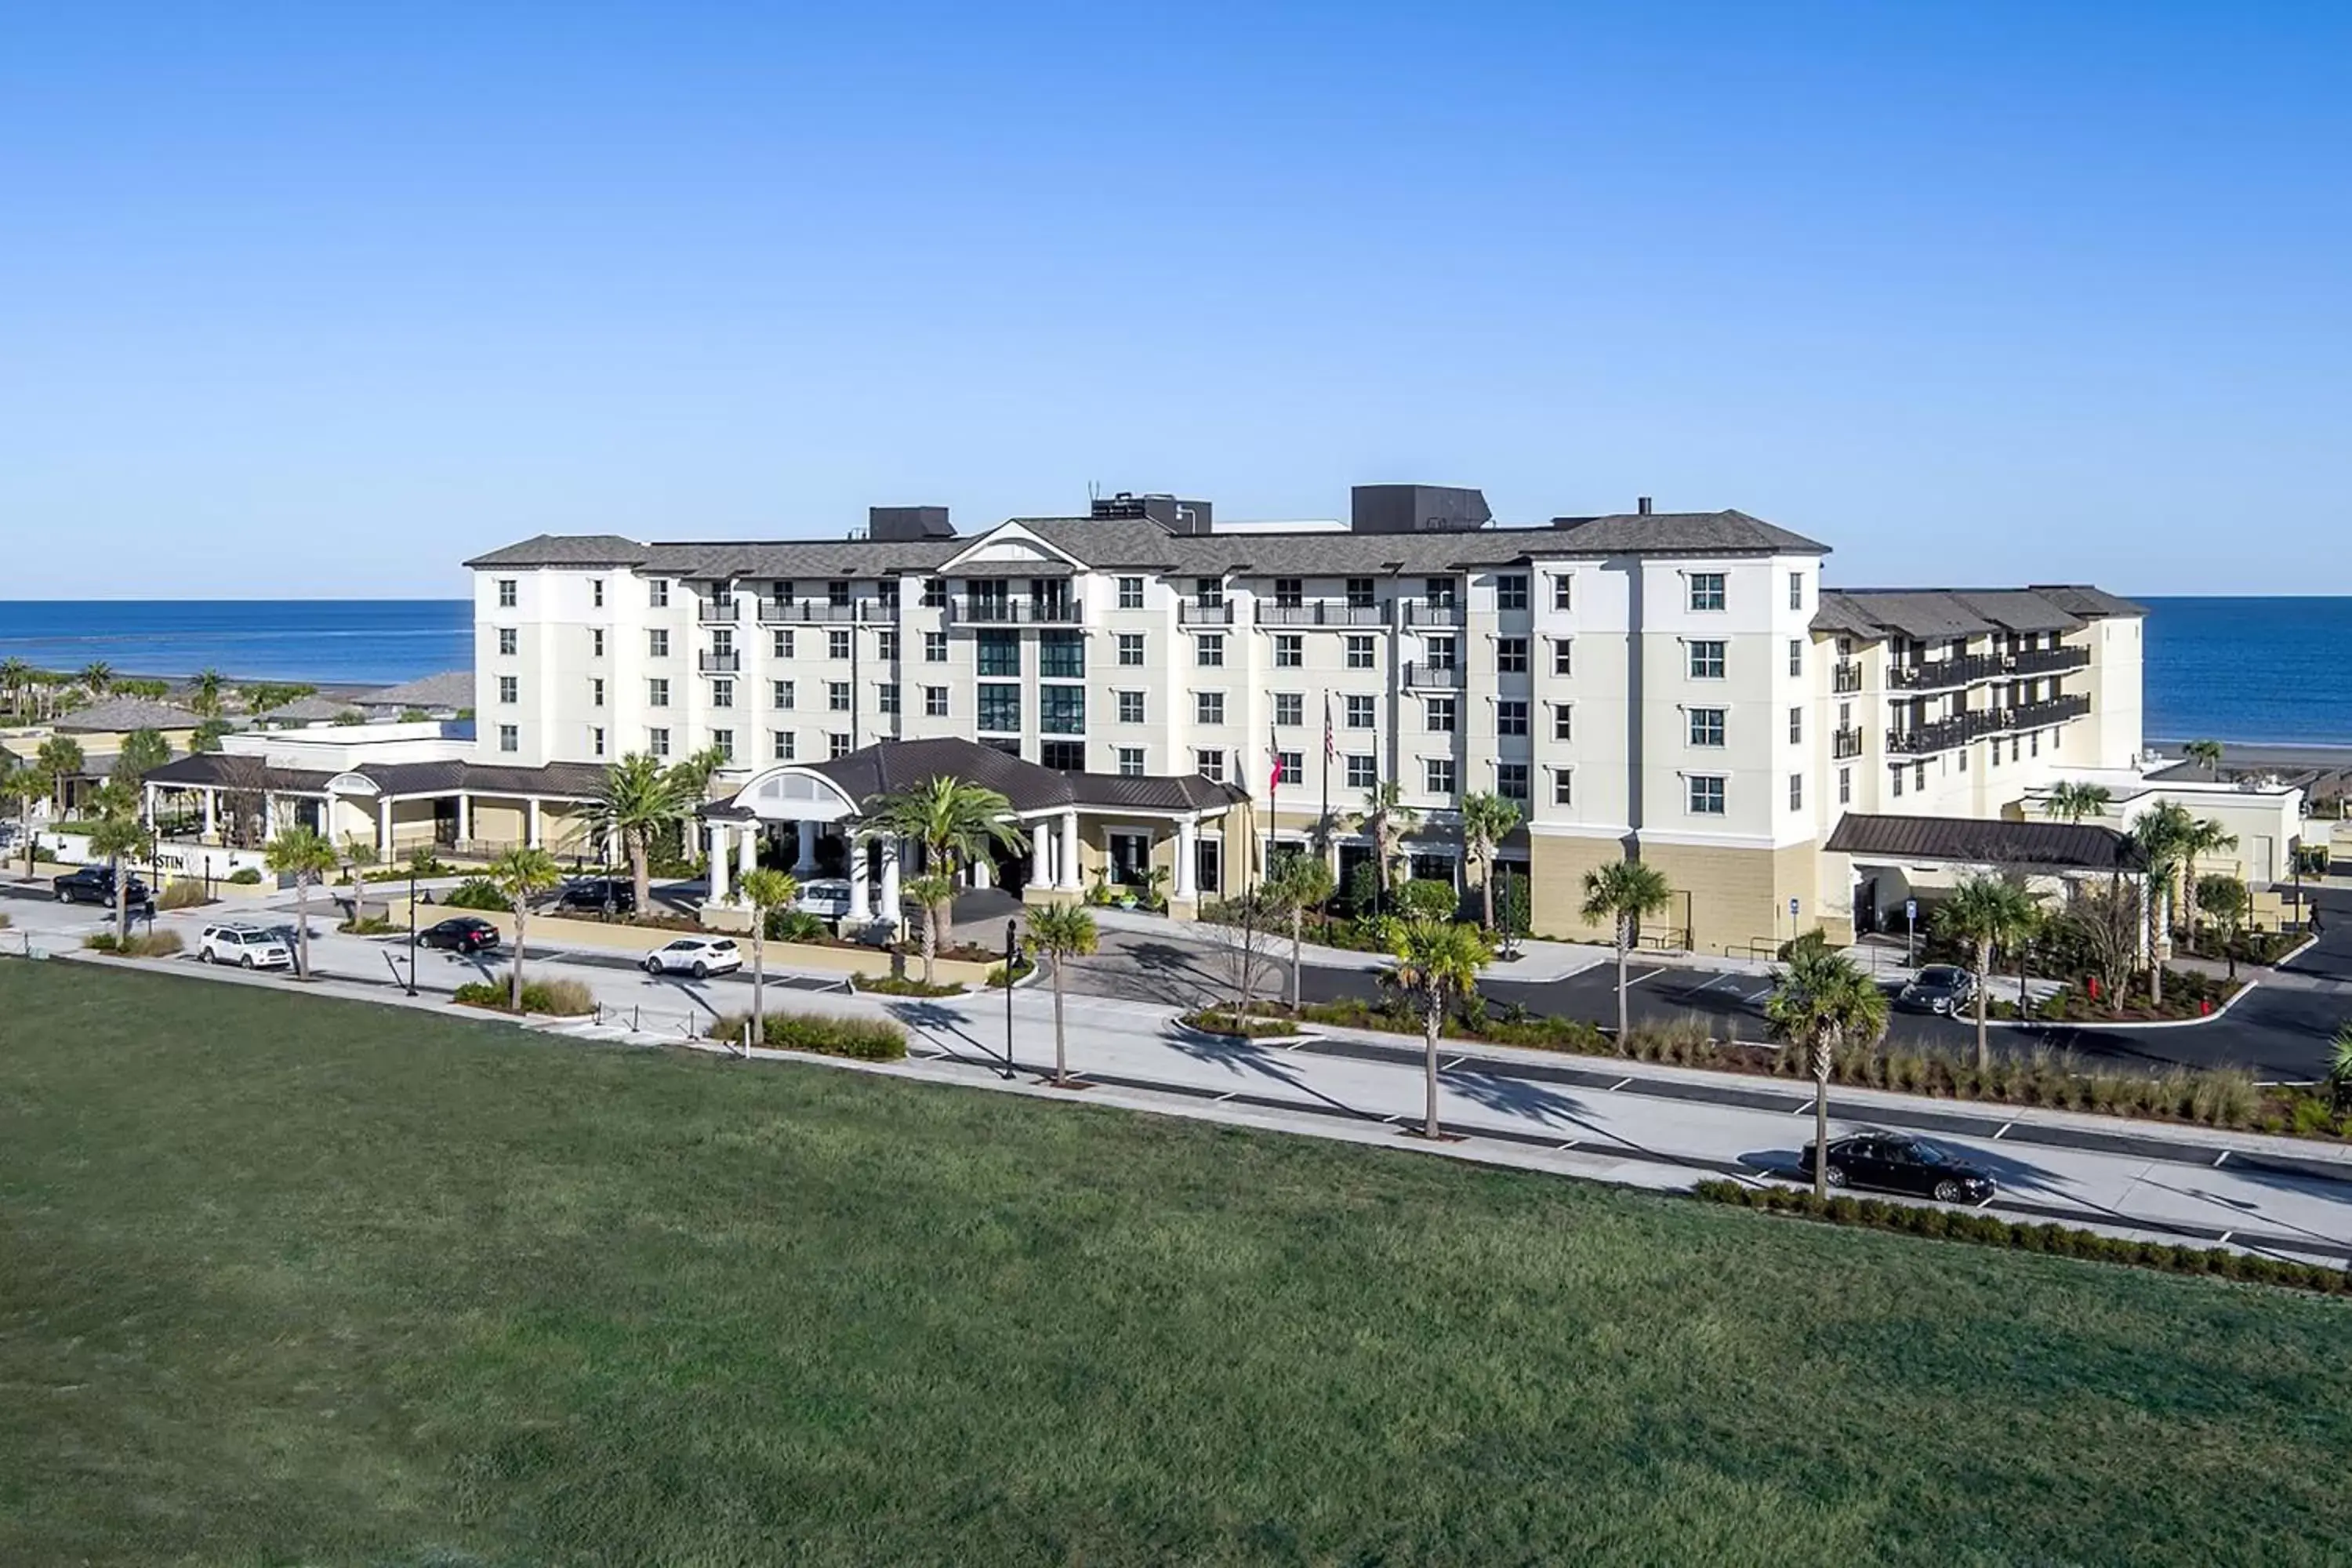 Property building in The Westin Jekyll Island